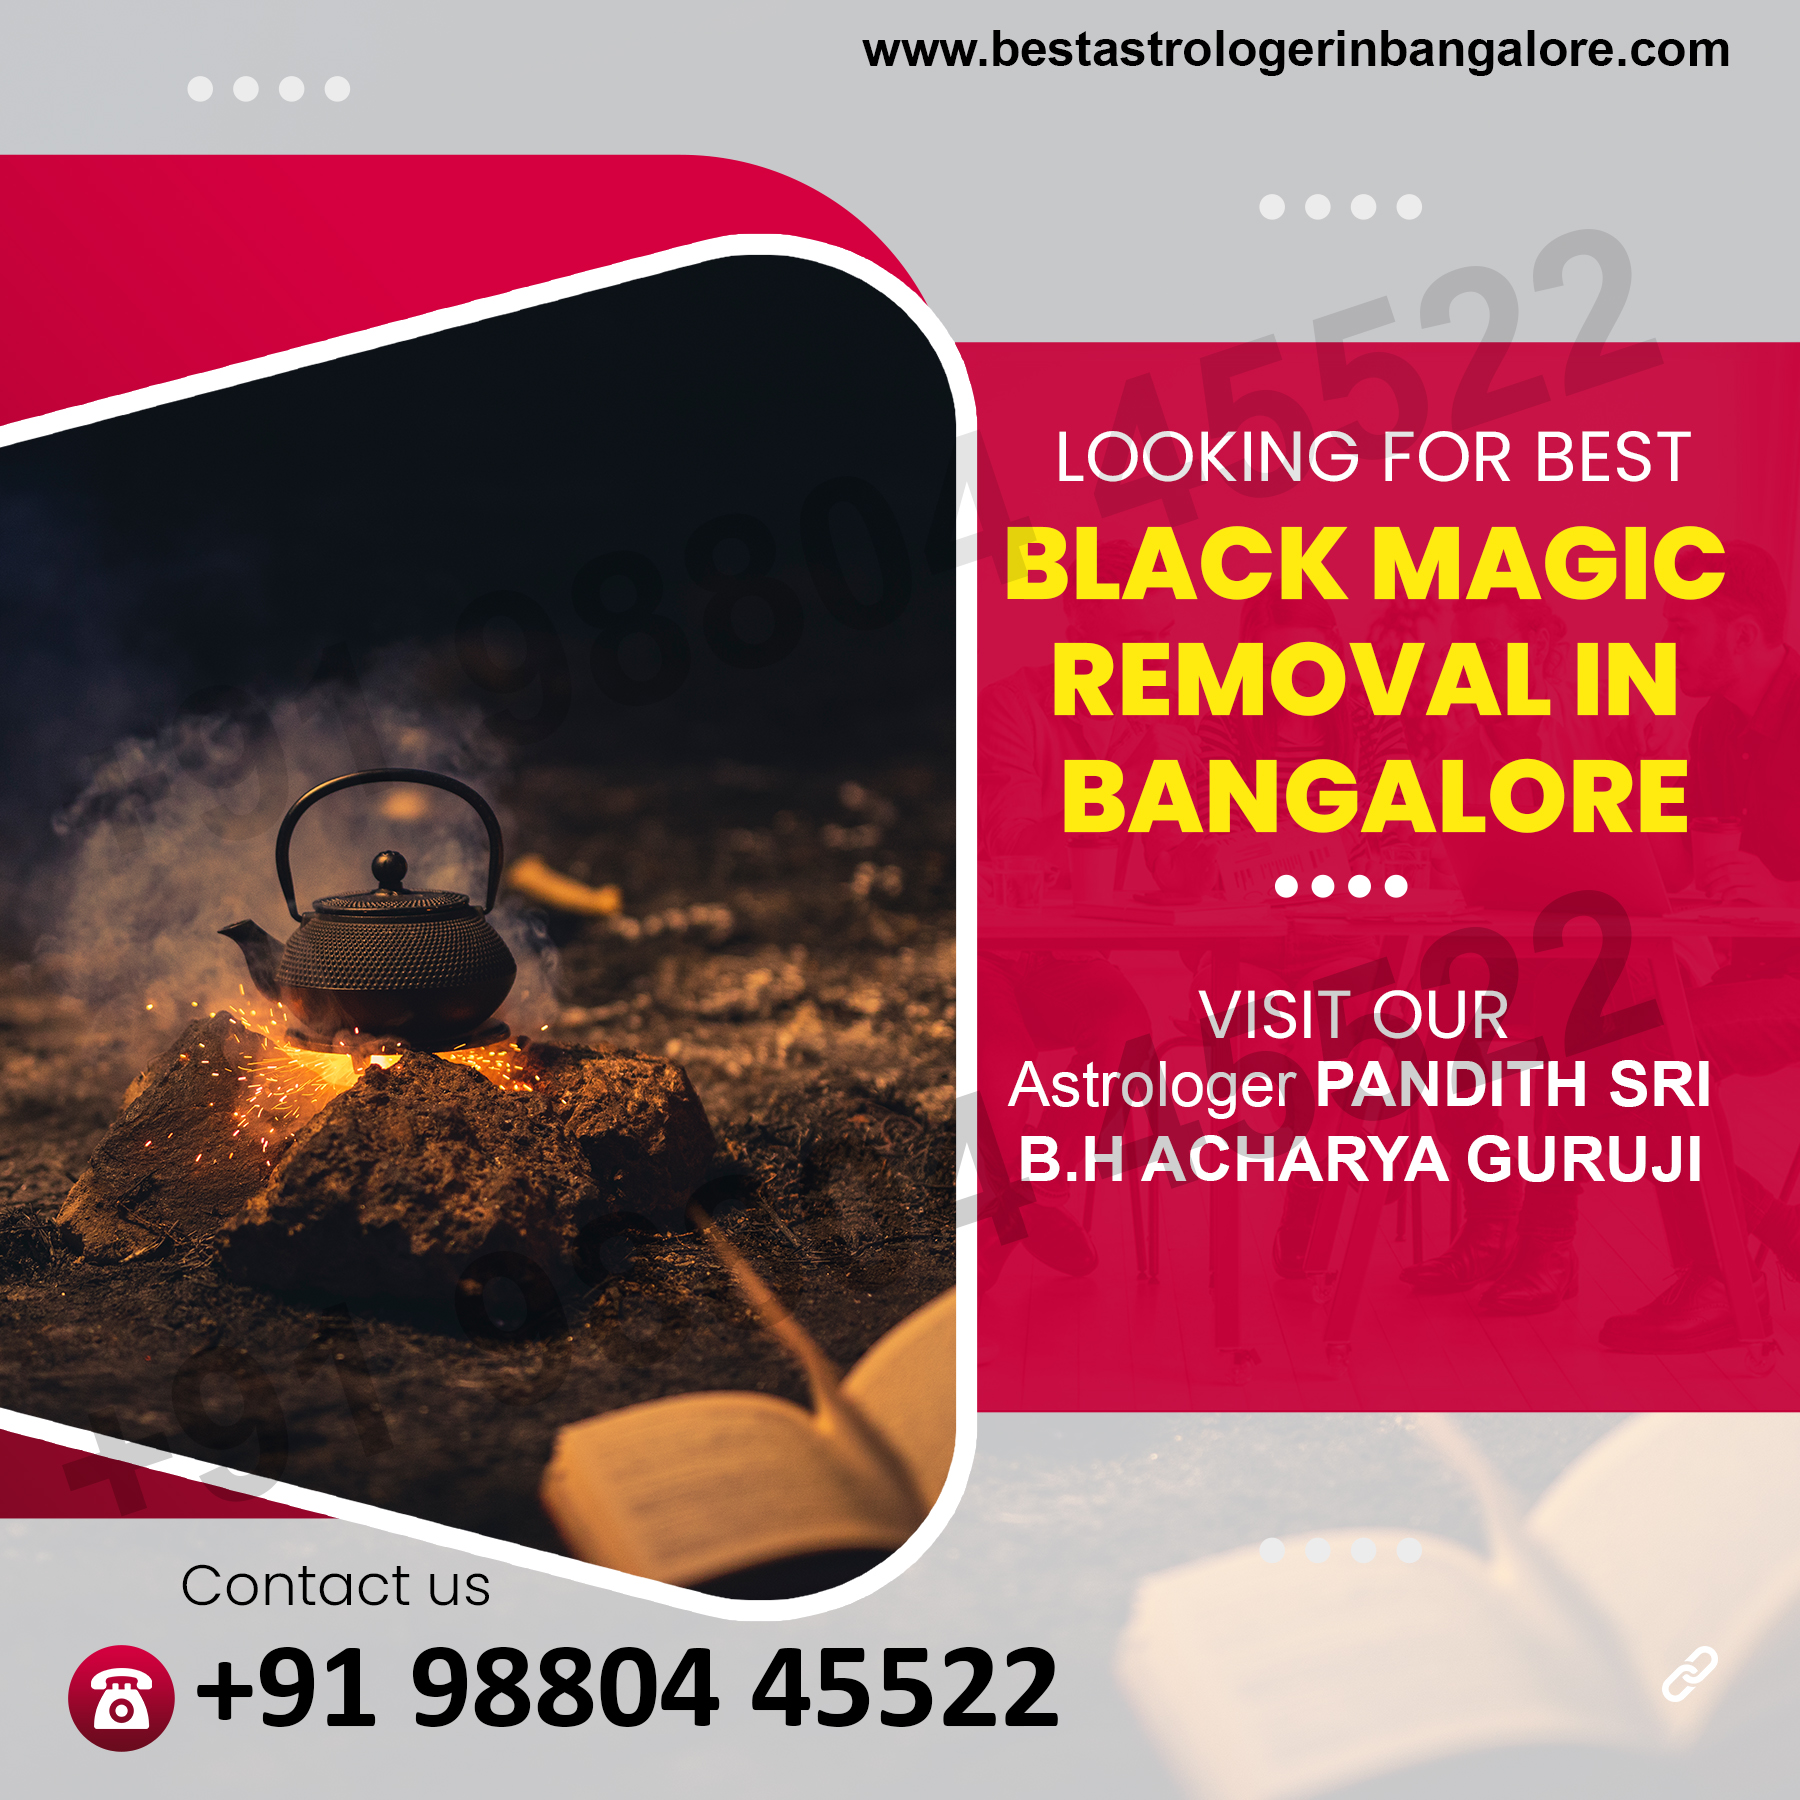 Best Black Magic Removal in Bangalore